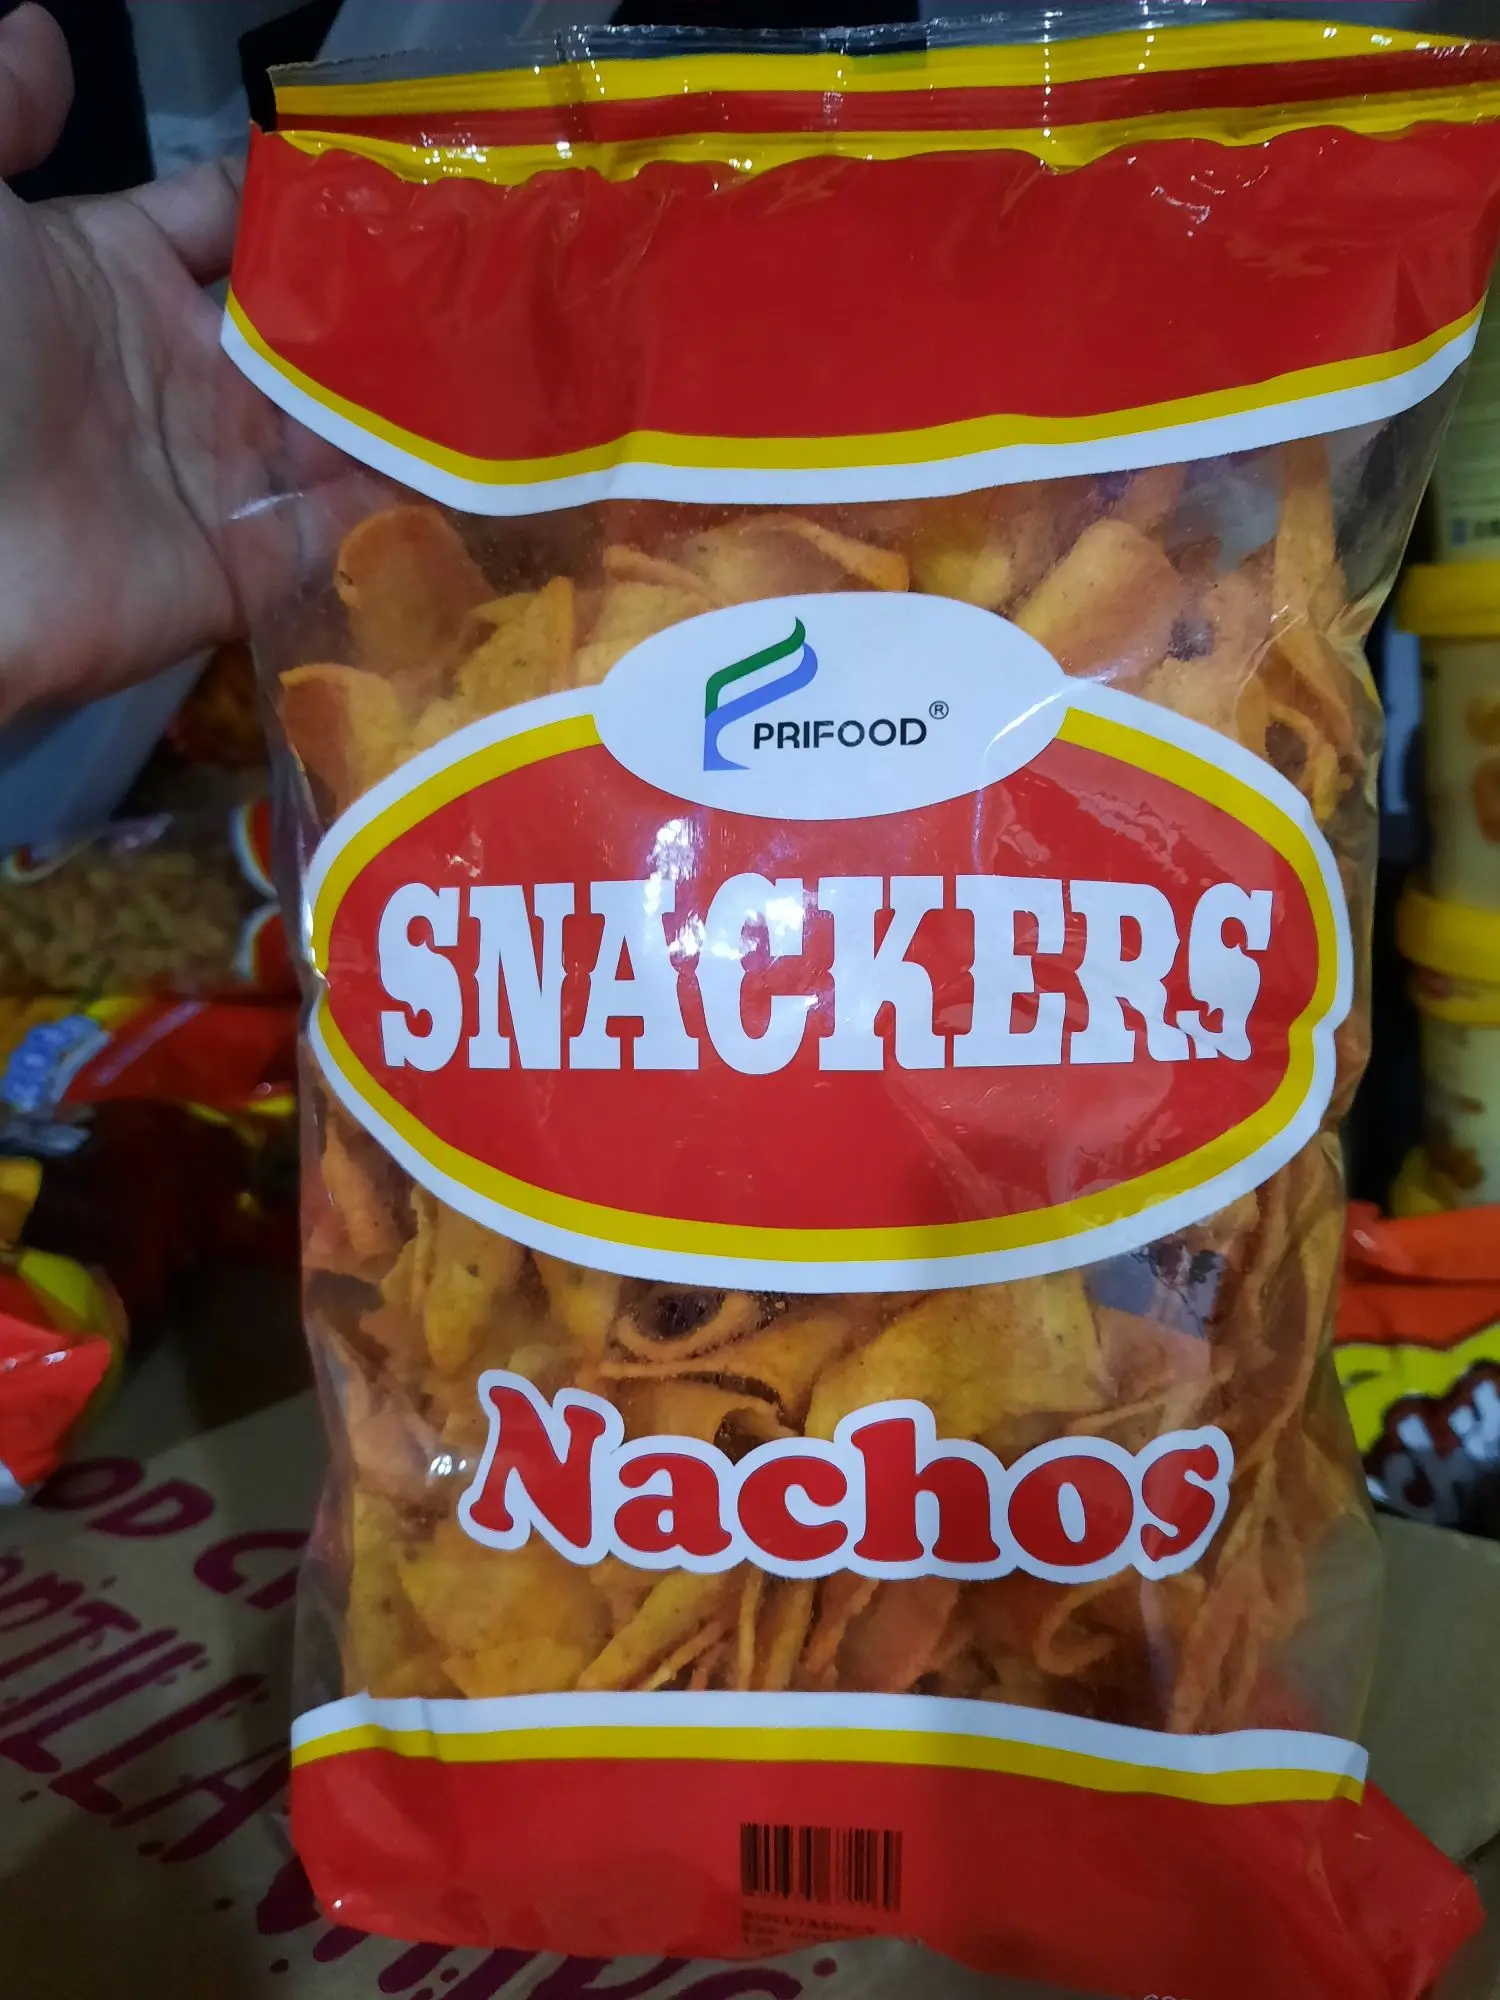 Snackers nachos sweet and spicy